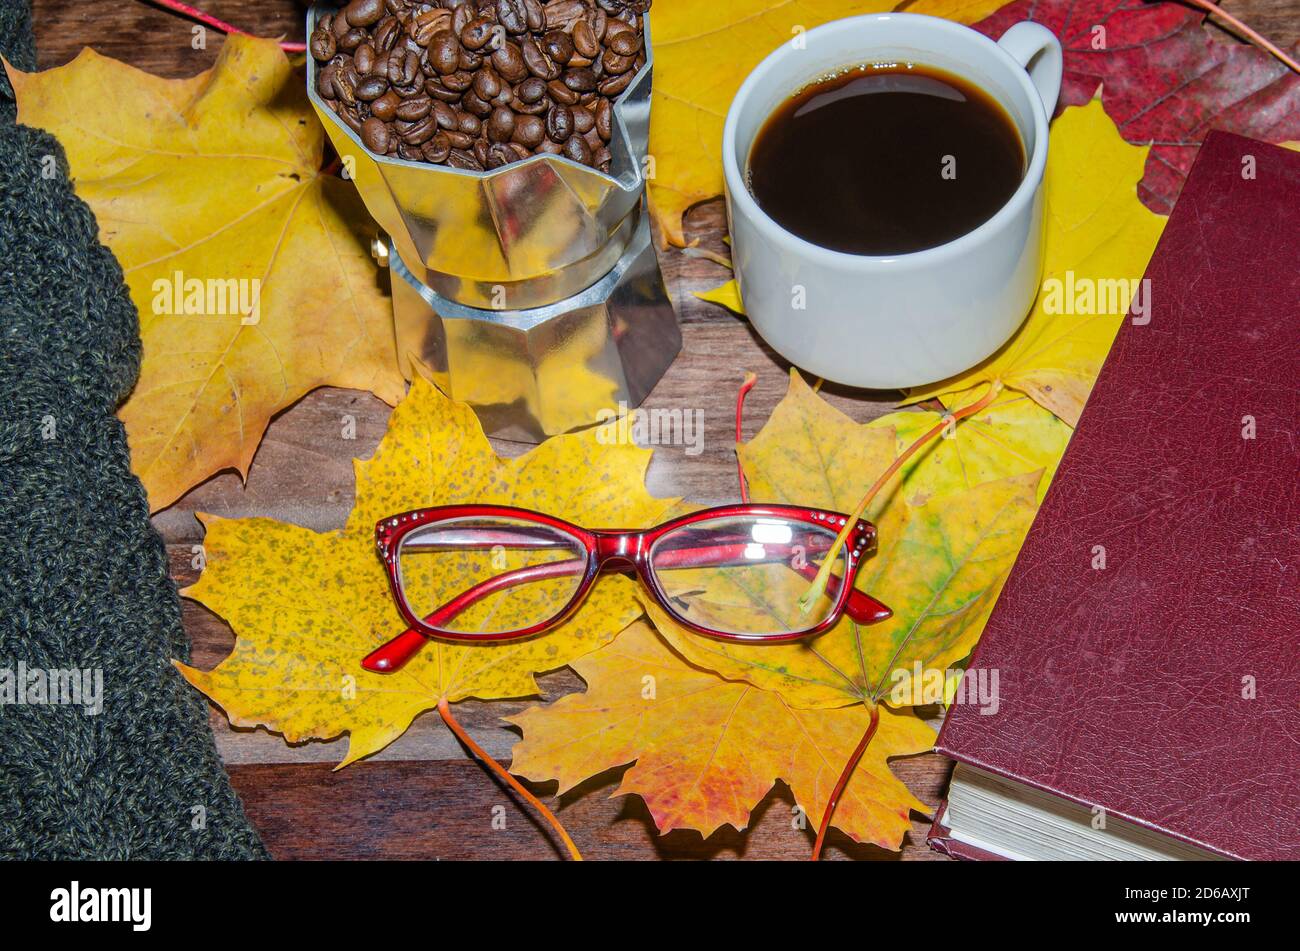 Hot coffee in red cup with steam and eyeglasses on stacked books wooden background, coffee break concept Stock Photo